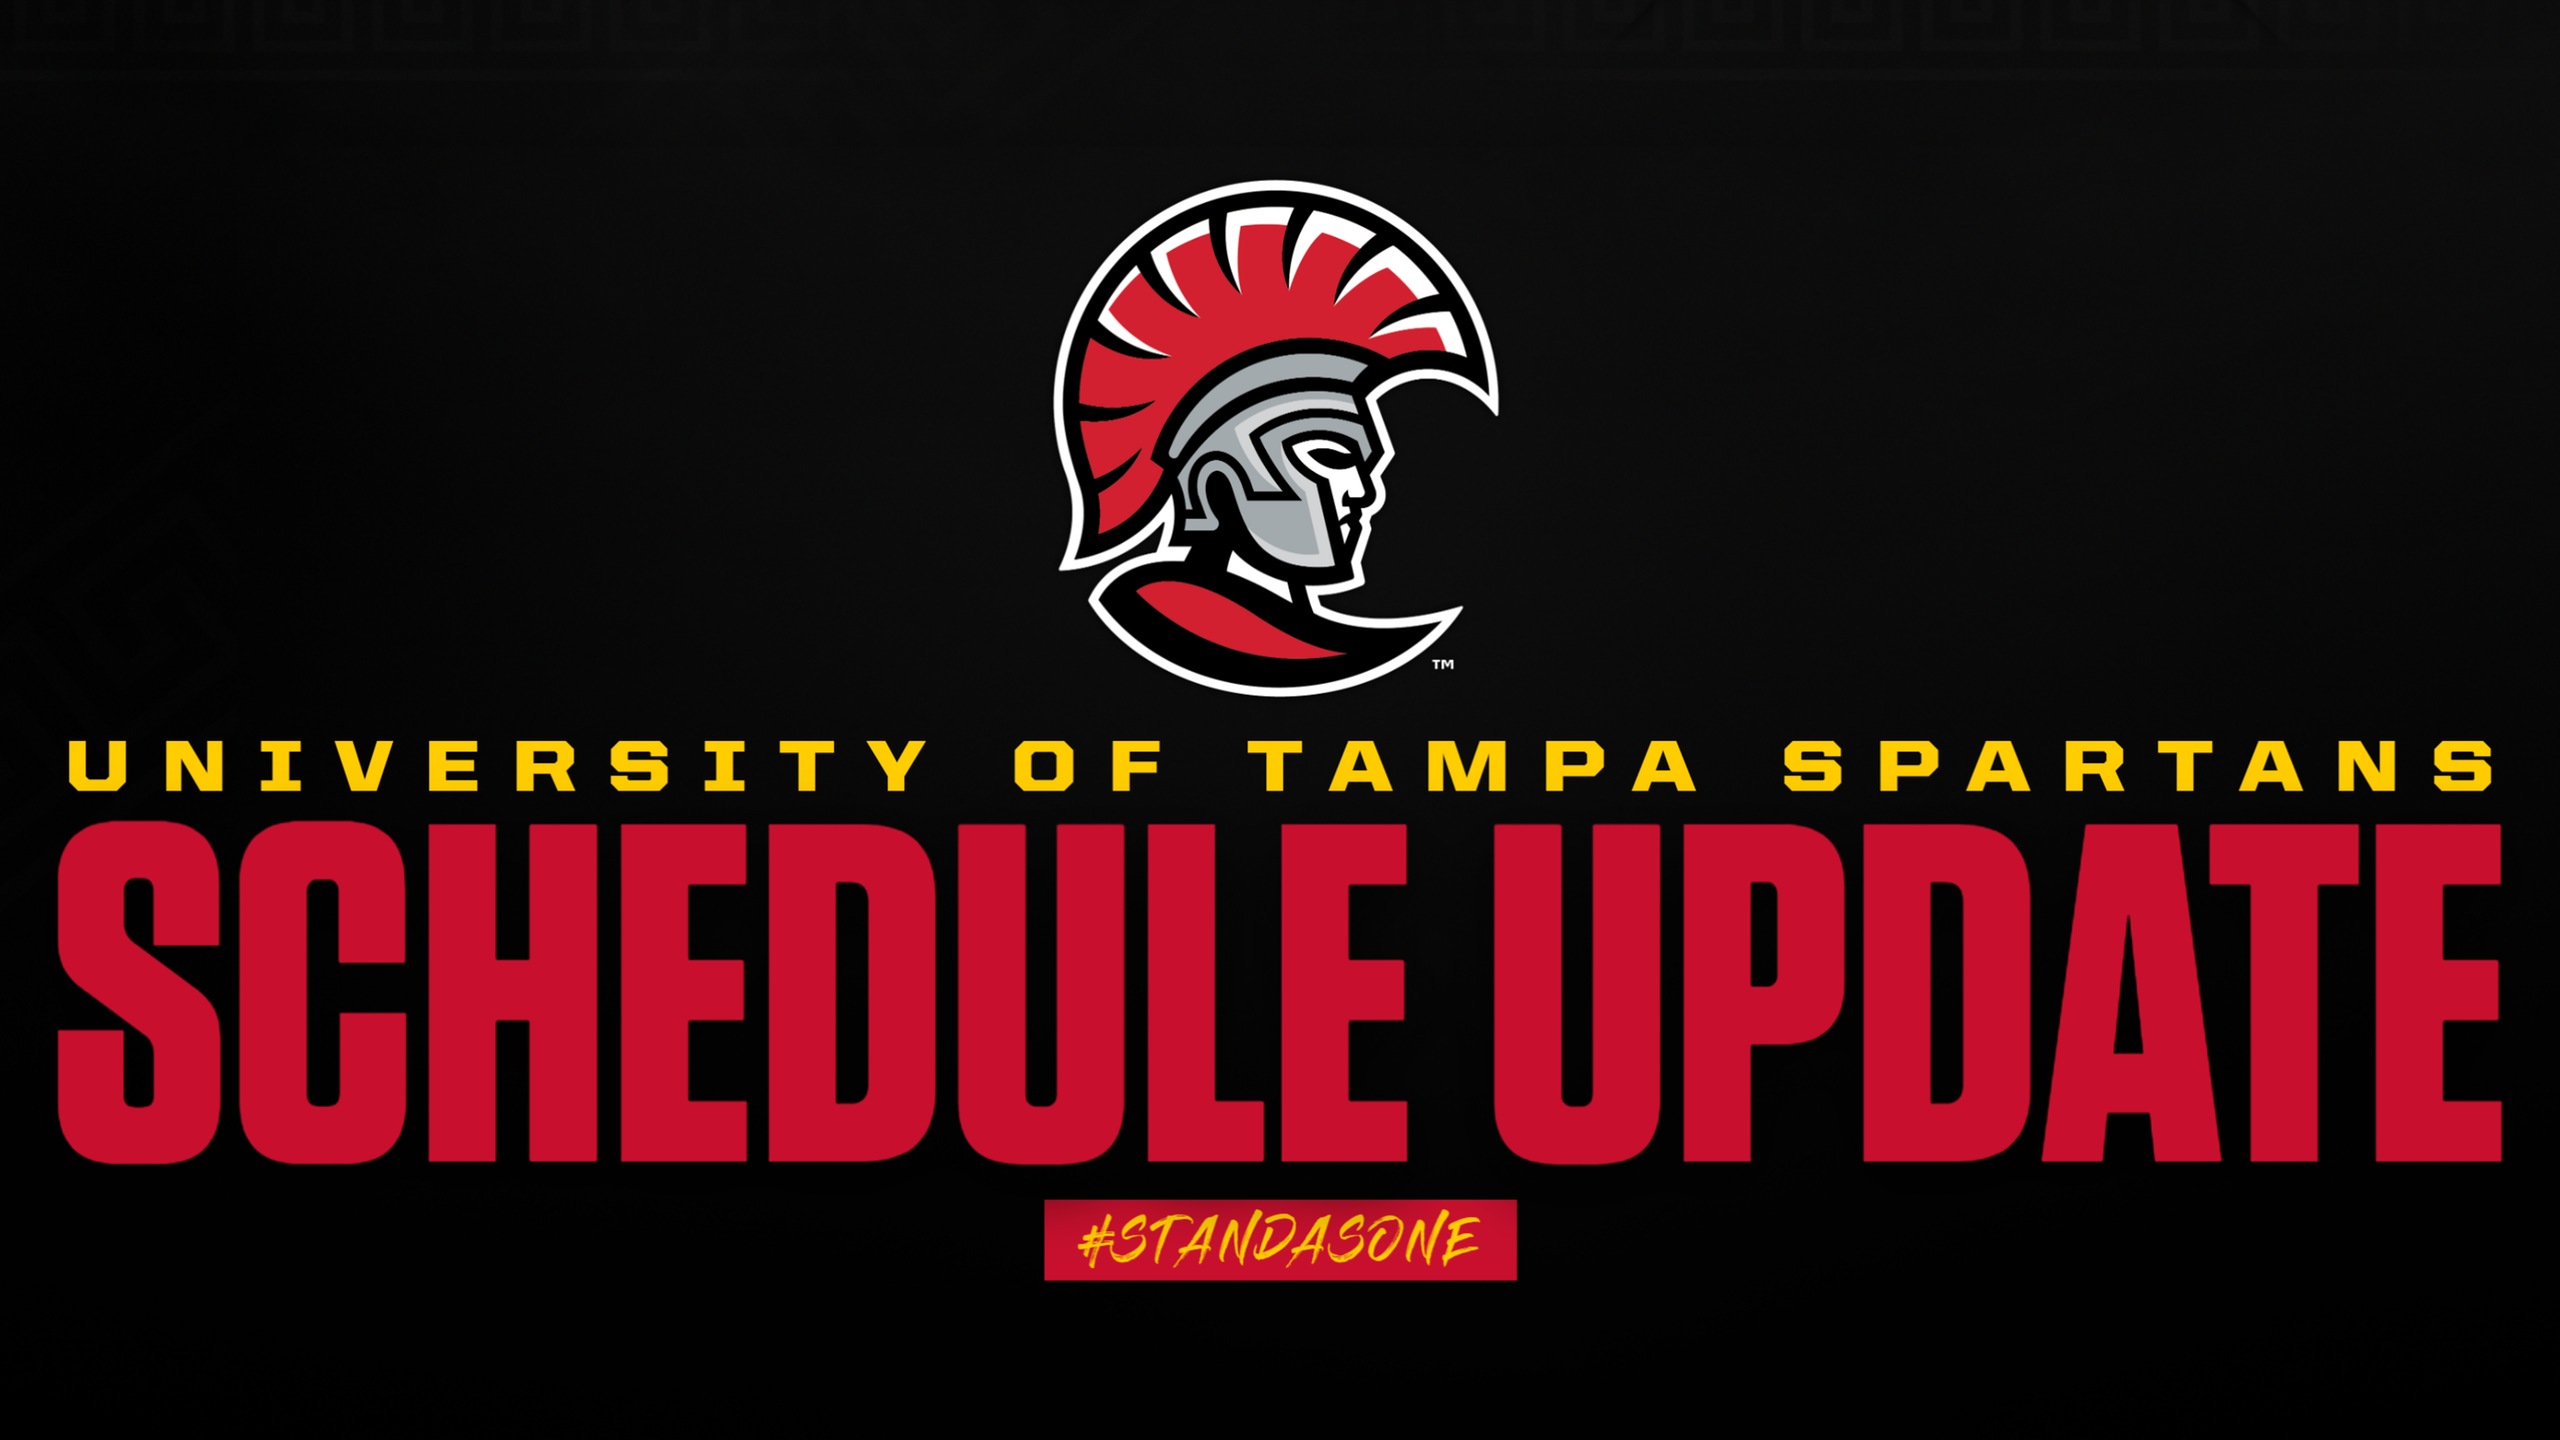 Barry at Tampa SSC Basketball Doubleheader Moved to Sunday